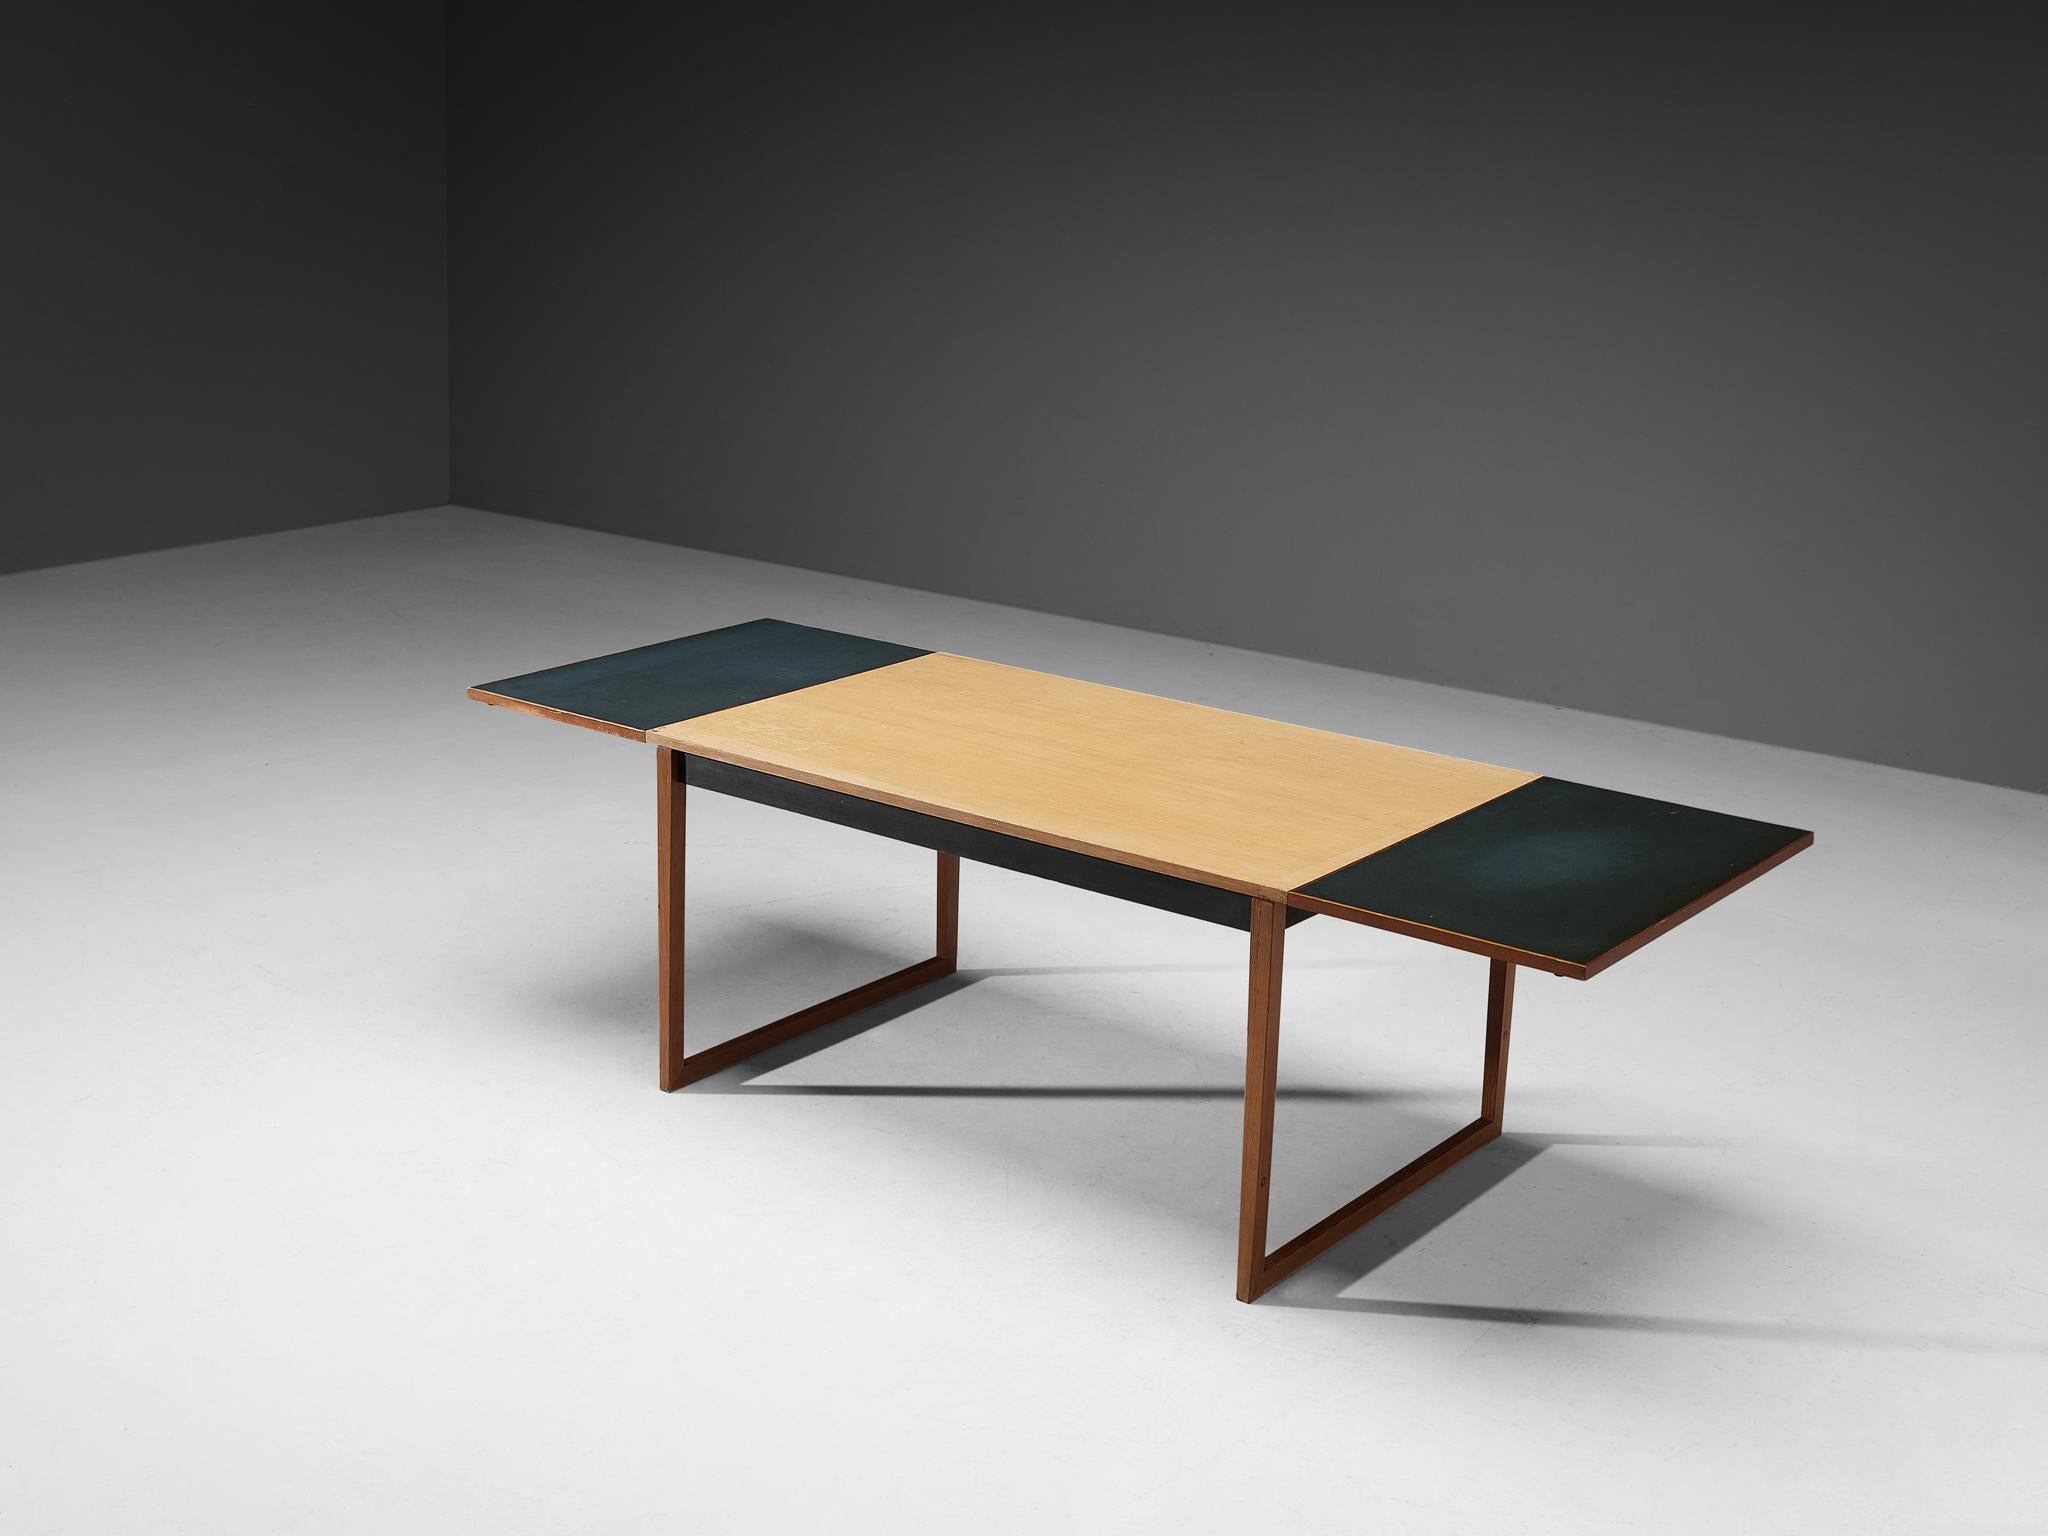 Knud Vodder for Niels Vodder, dining table, Oregon pine, formica, Denmark, designed in 1958.

Knud Vodder, the son and maker of this table Niels Vodder, designed this table specifically for his own home. This table was first presented at the